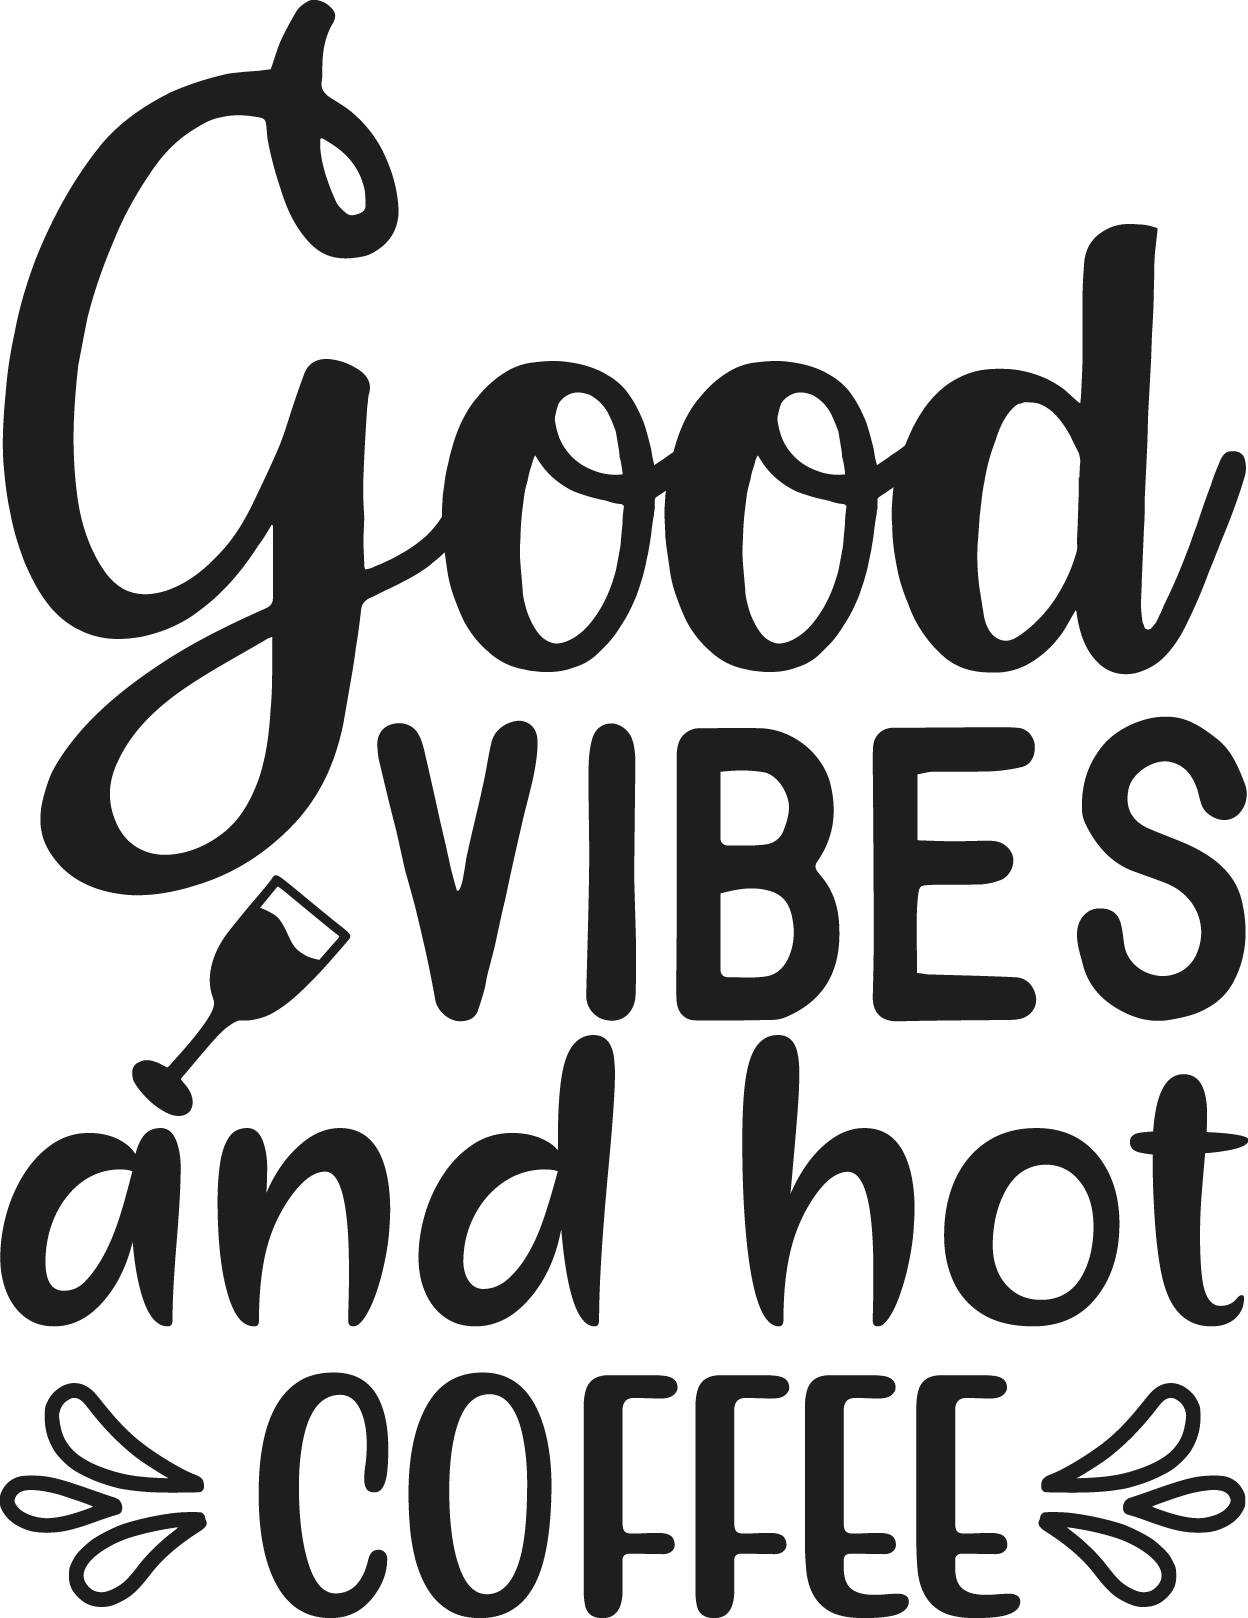 Good Vibes Coffee Mug - Home of Buy 3, Get 1 Free. Long Lasting Custom Designed Coffee Mugs for Business and Pleasure. Perfect for Christmas, Housewarming, Wedding Party gifts